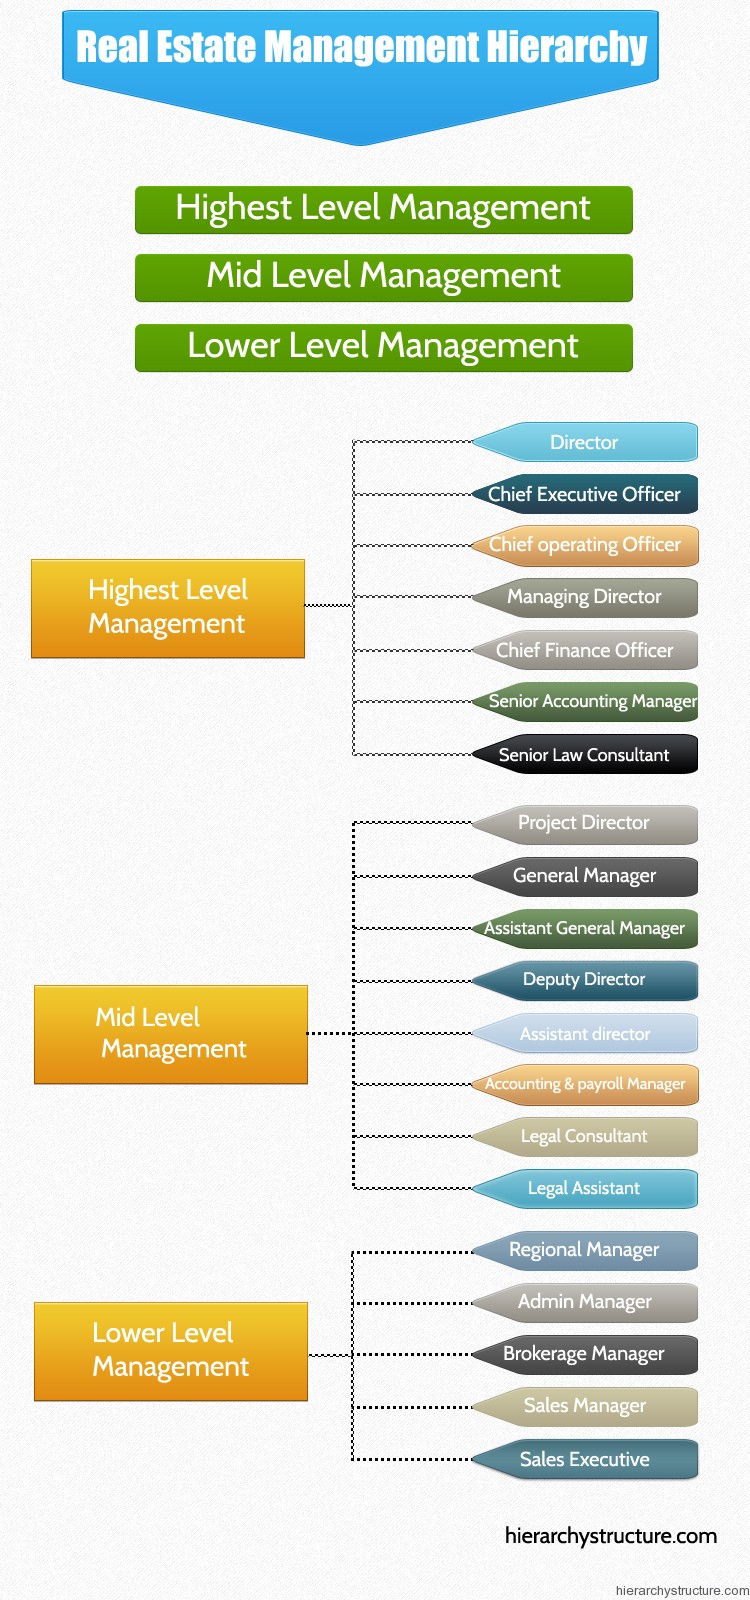 Real Estate Management Hierarchy